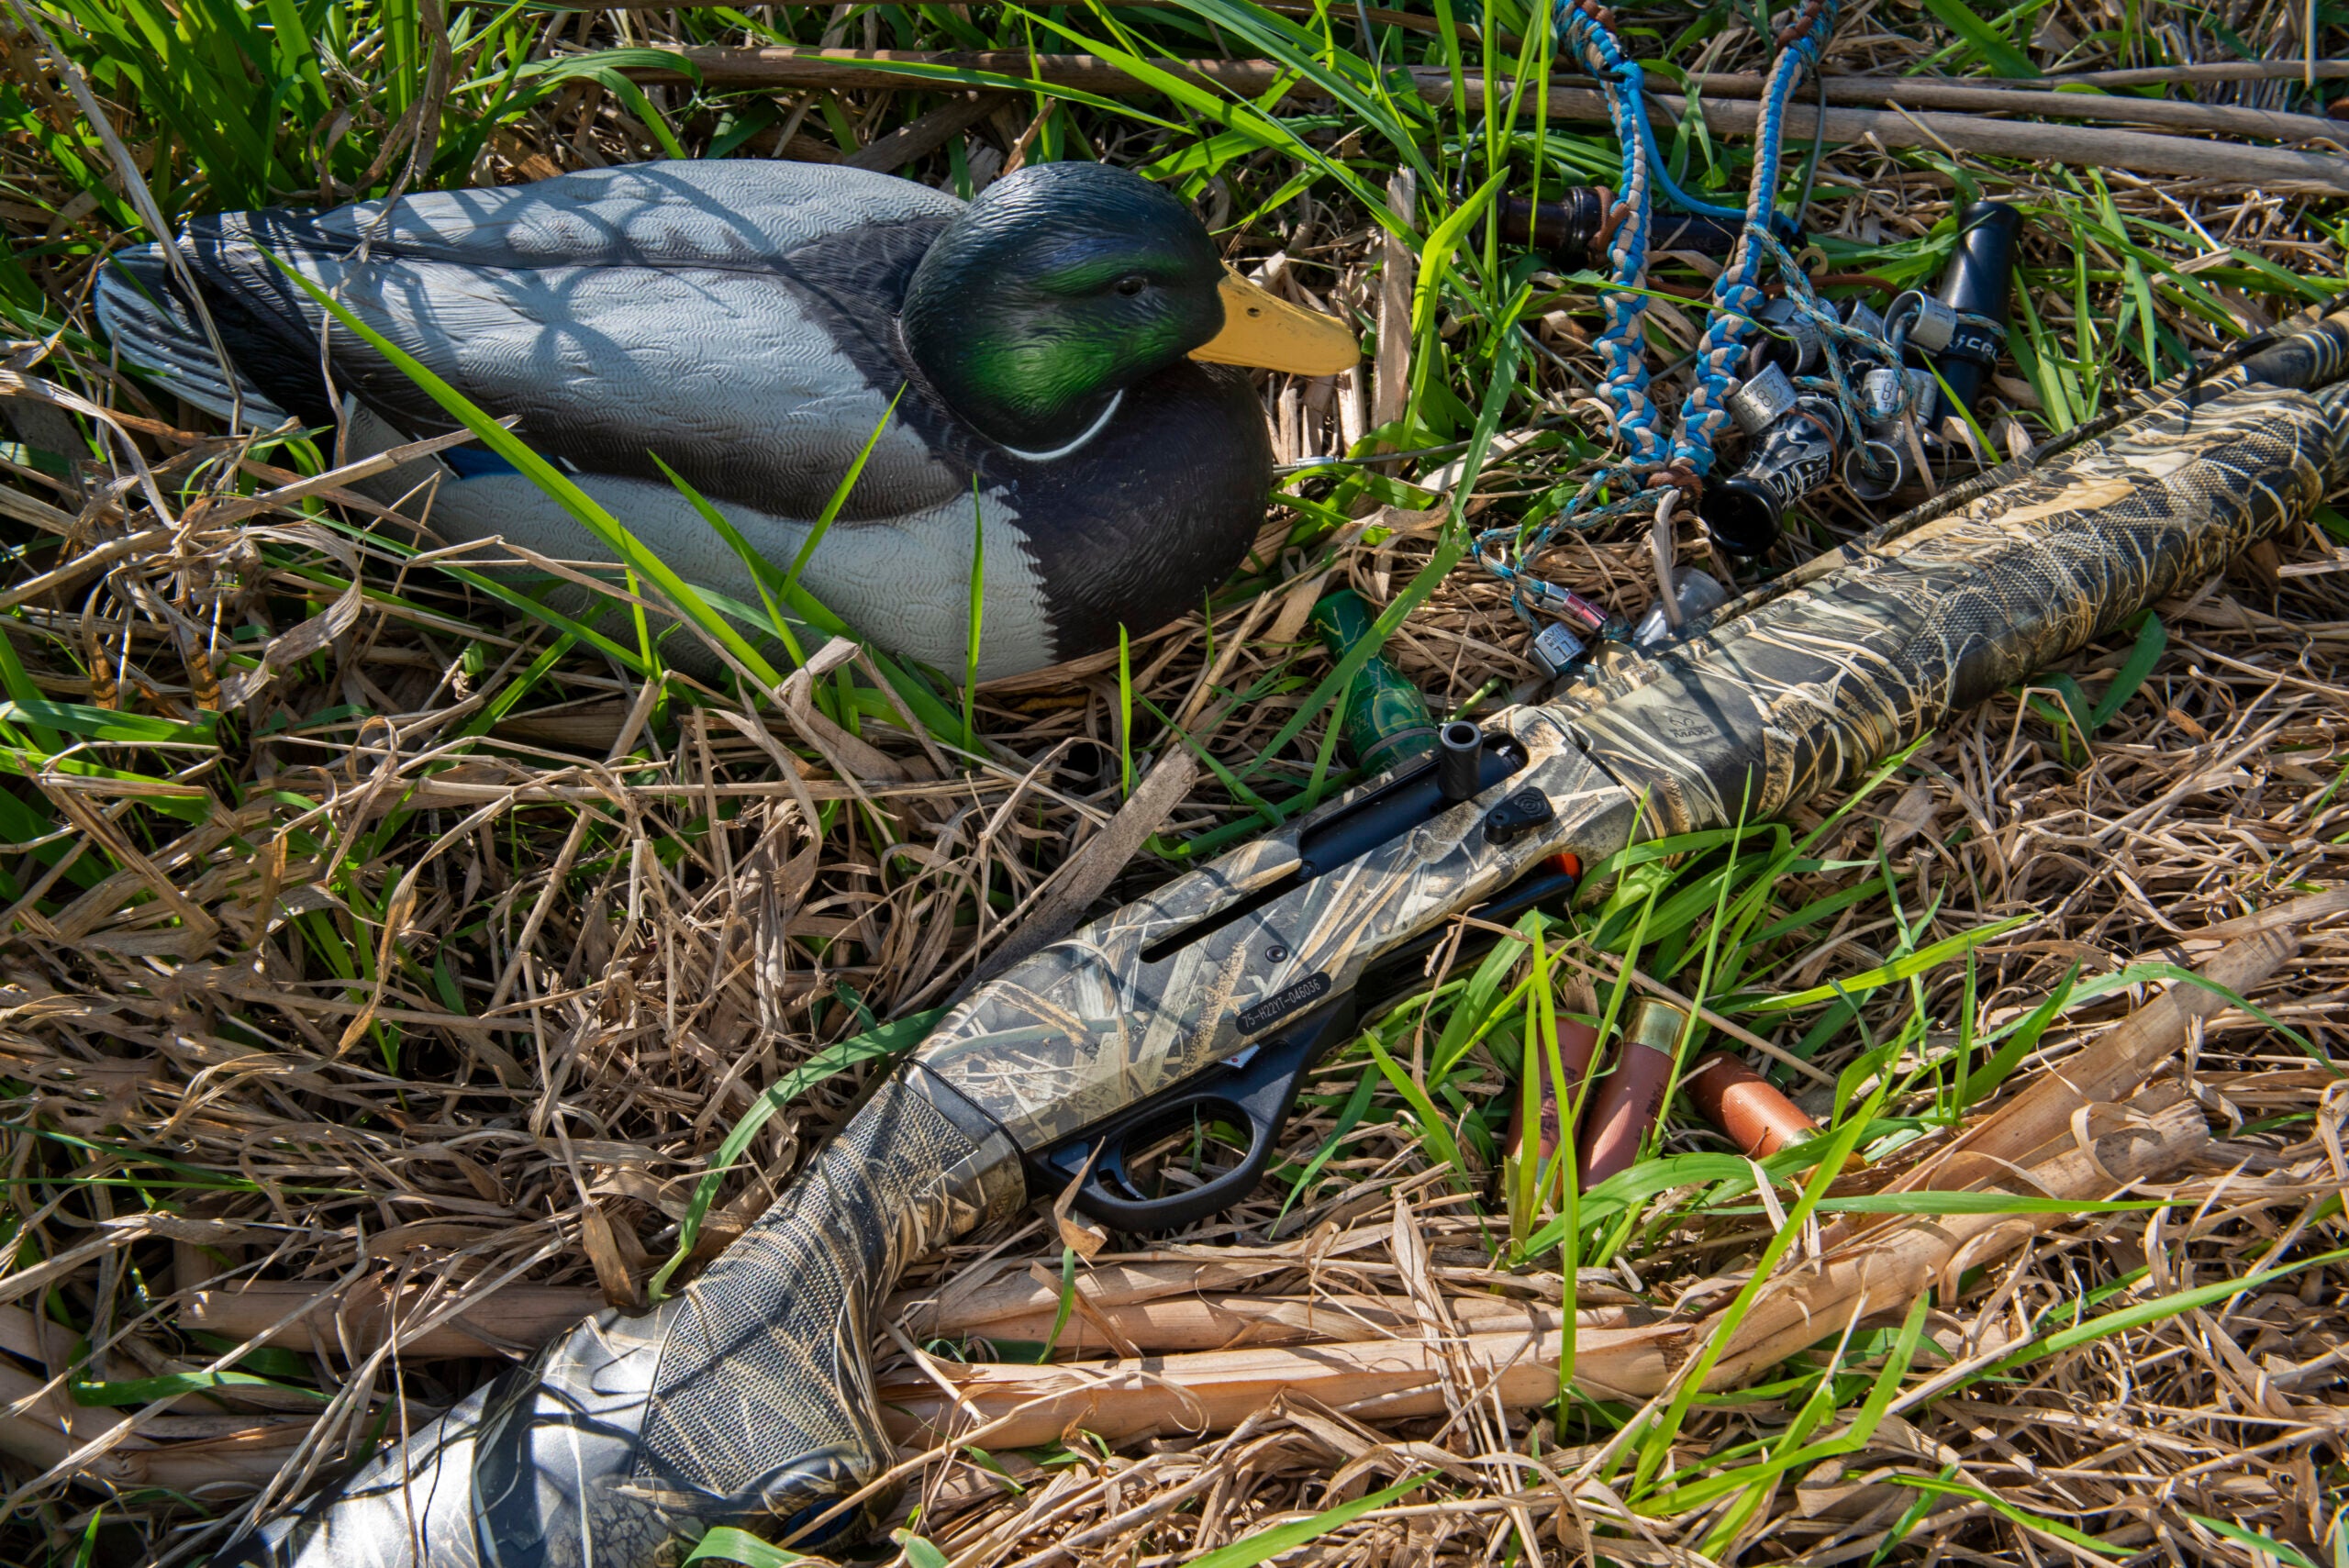 Close-up of new Stoeger M3000 lying among marsh grasses with duck decoy.